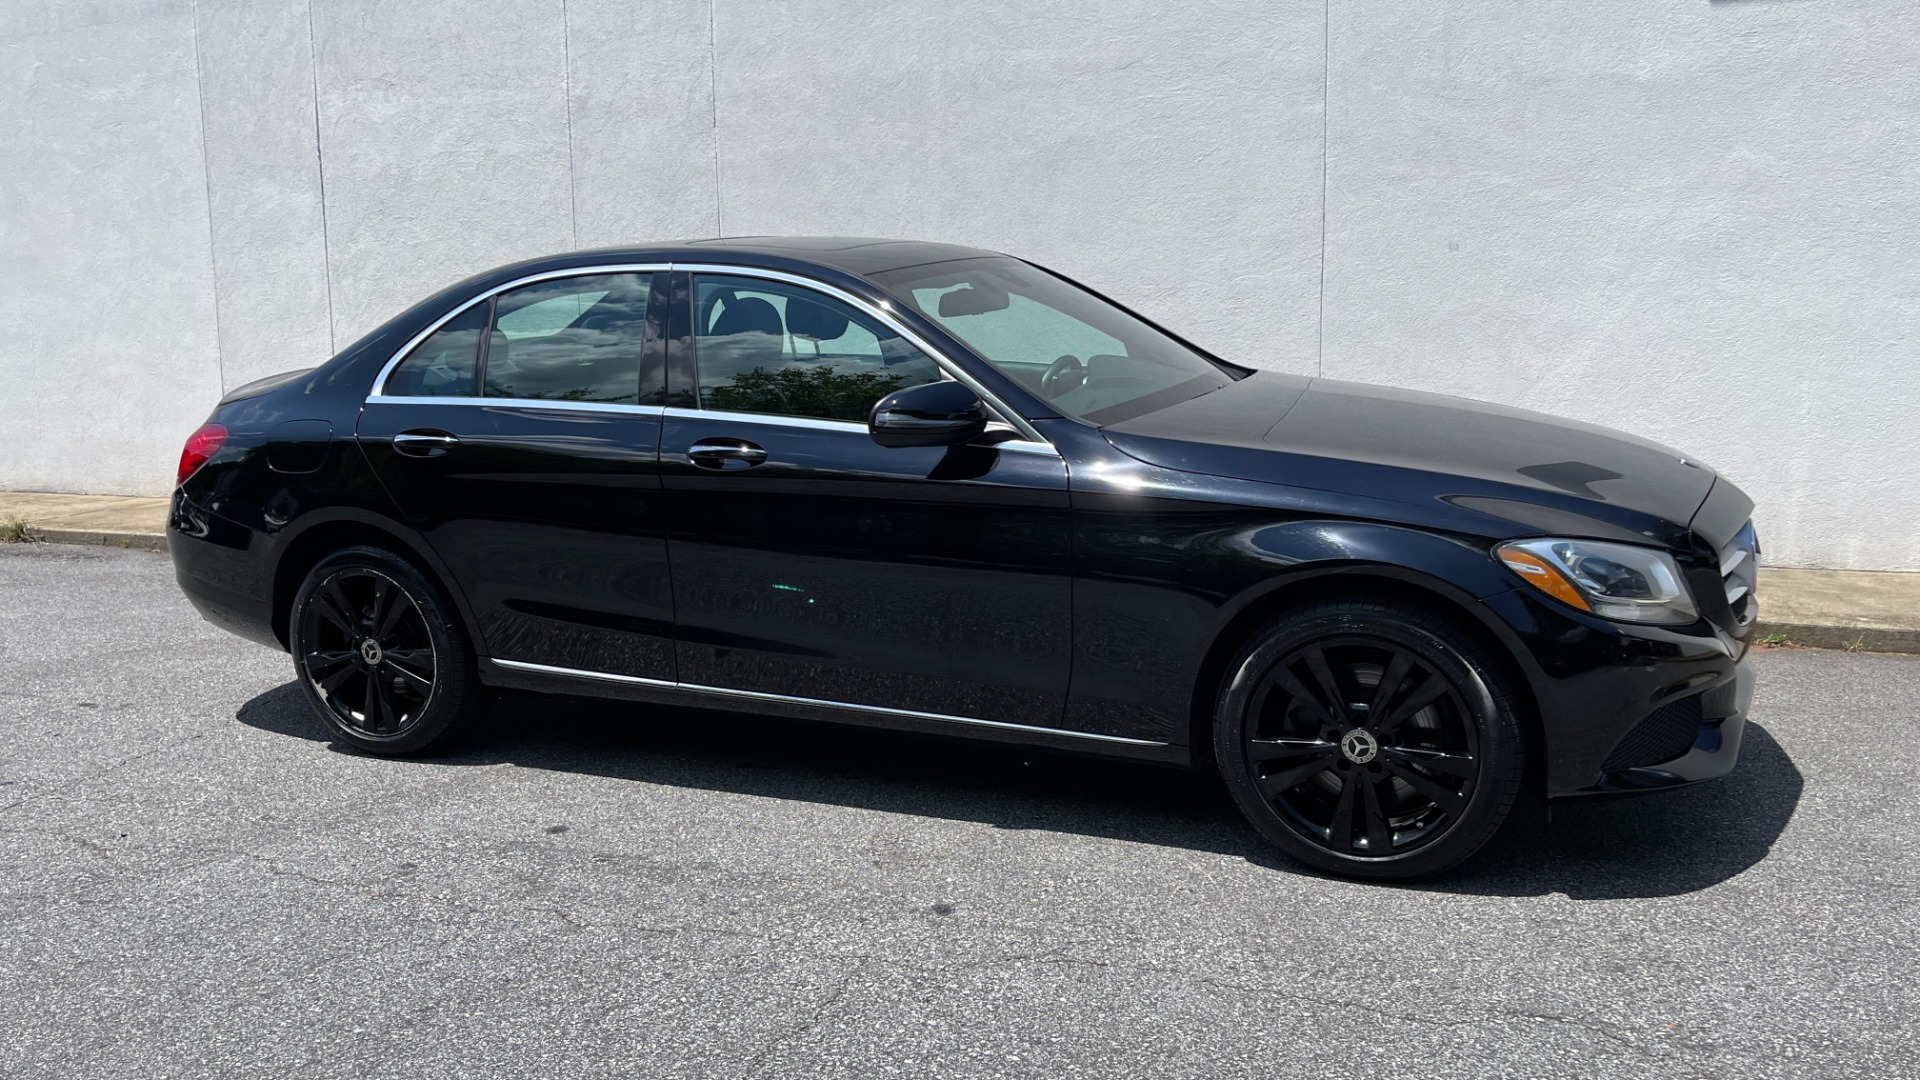 Used 2018 Mercedes-Benz C-Class C 300 / PREMIUM / REVIEW CAM / HTD SEATS / 18IN WHEELS for sale $31,295 at Formula Imports in Charlotte NC 28227 2